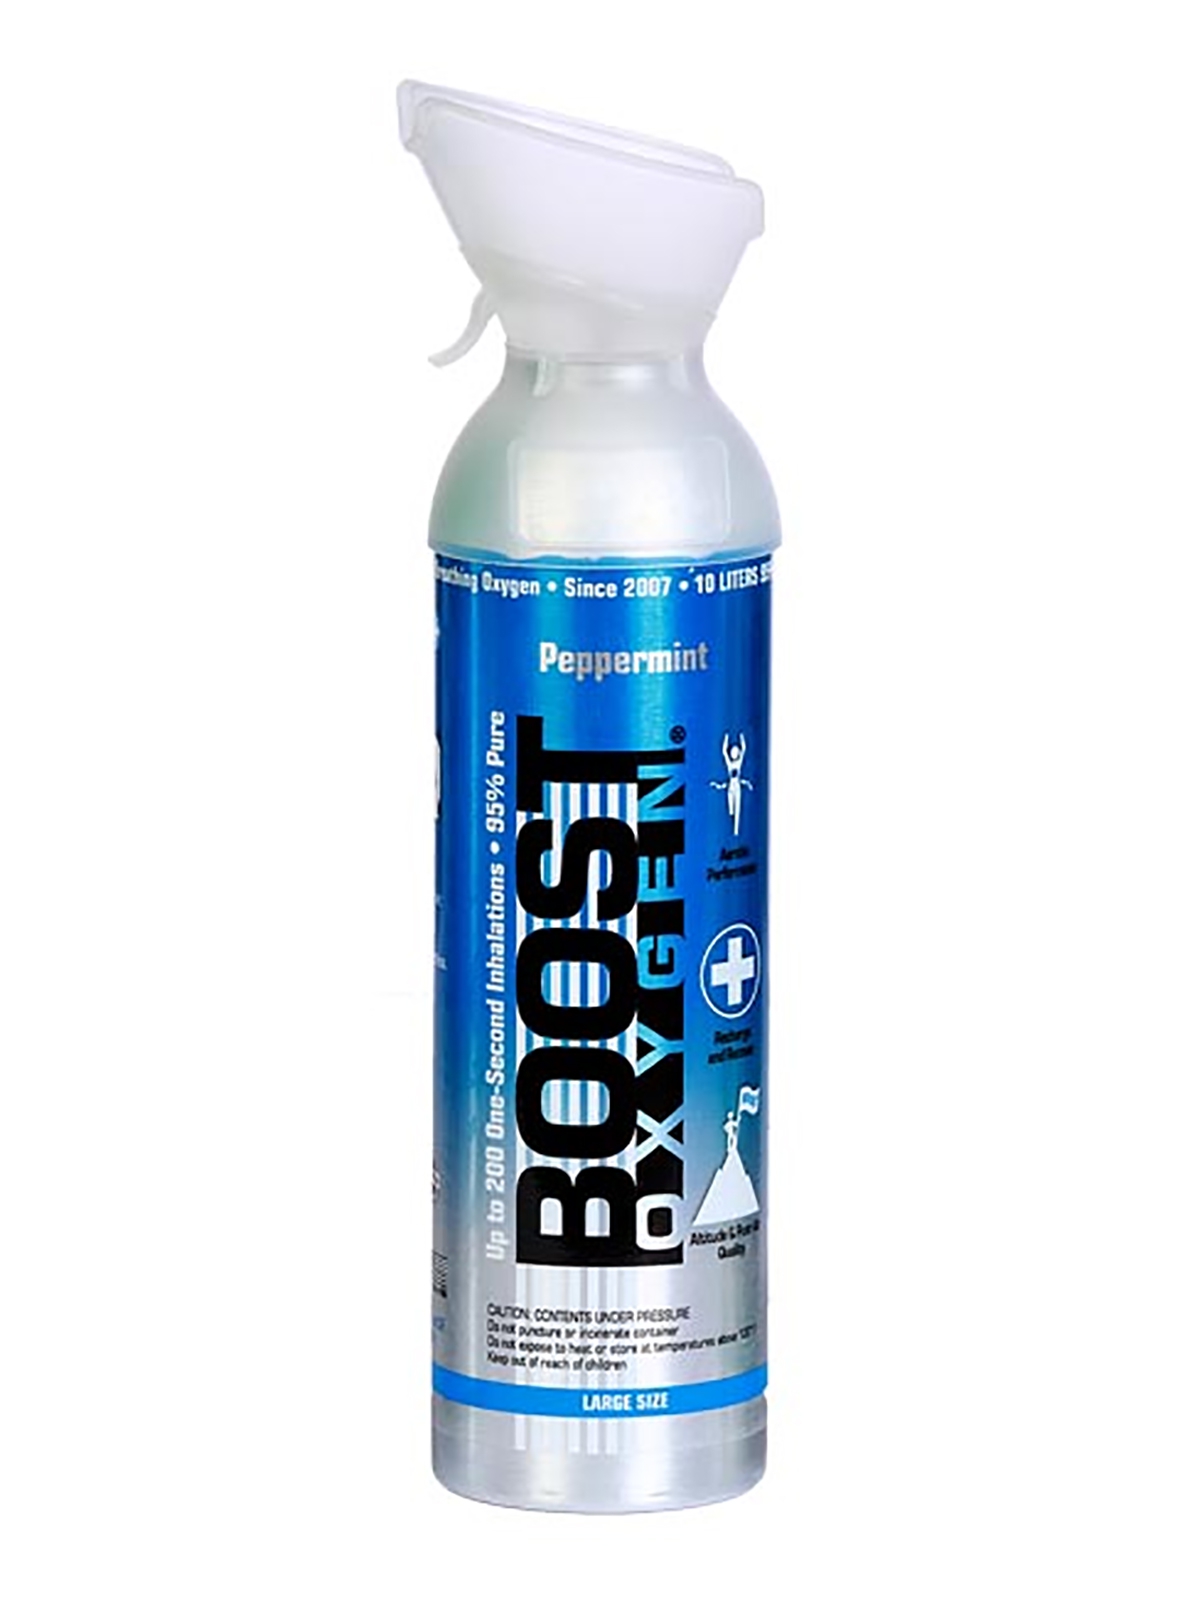 Boost Oxygen Peppermint - 95% pure oxygen with taste, 9 liters can